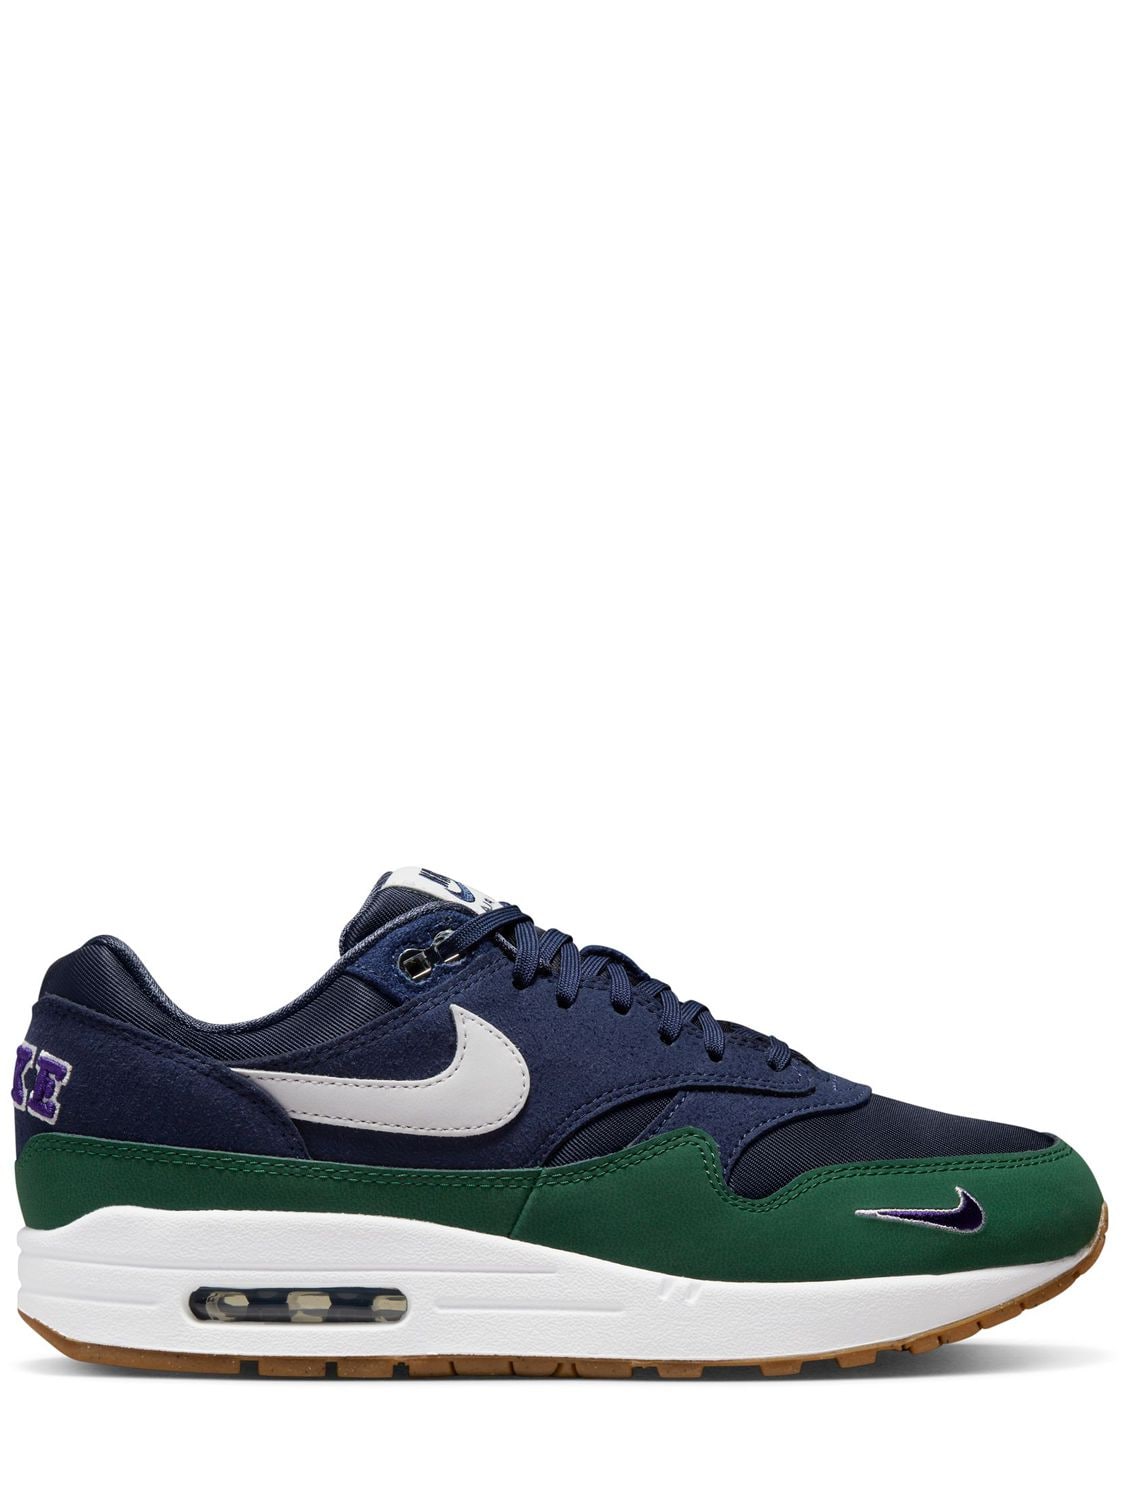 Air Max 1 ’87 Qs Sneakers – WOMEN > SHOES > SNEAKERS